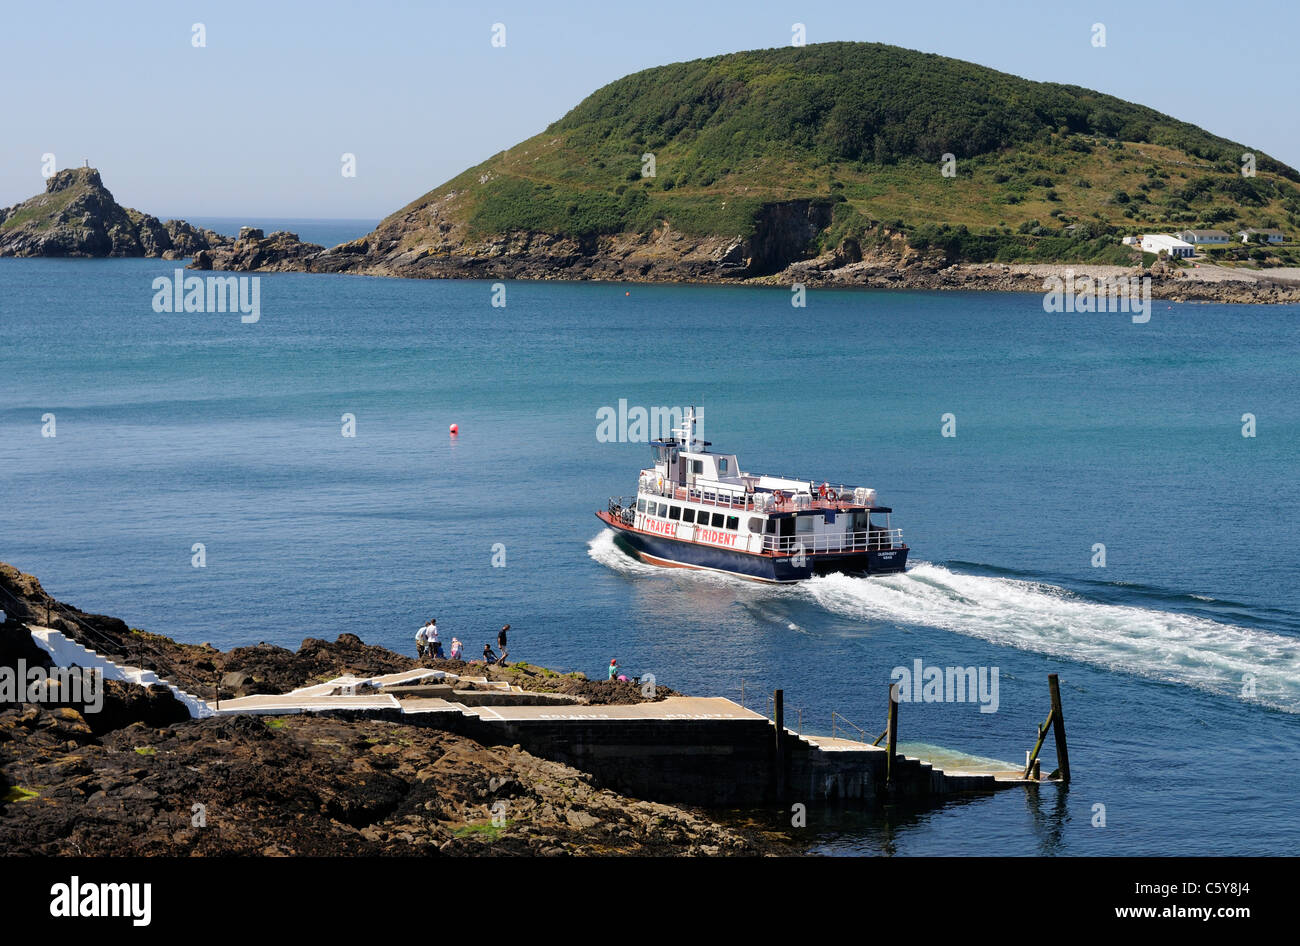 A Trident ferry leaves Rosaire steps  on Herm for St Peter Port in Guernsey. The island of Jethou can be seen in the background. Stock Photo